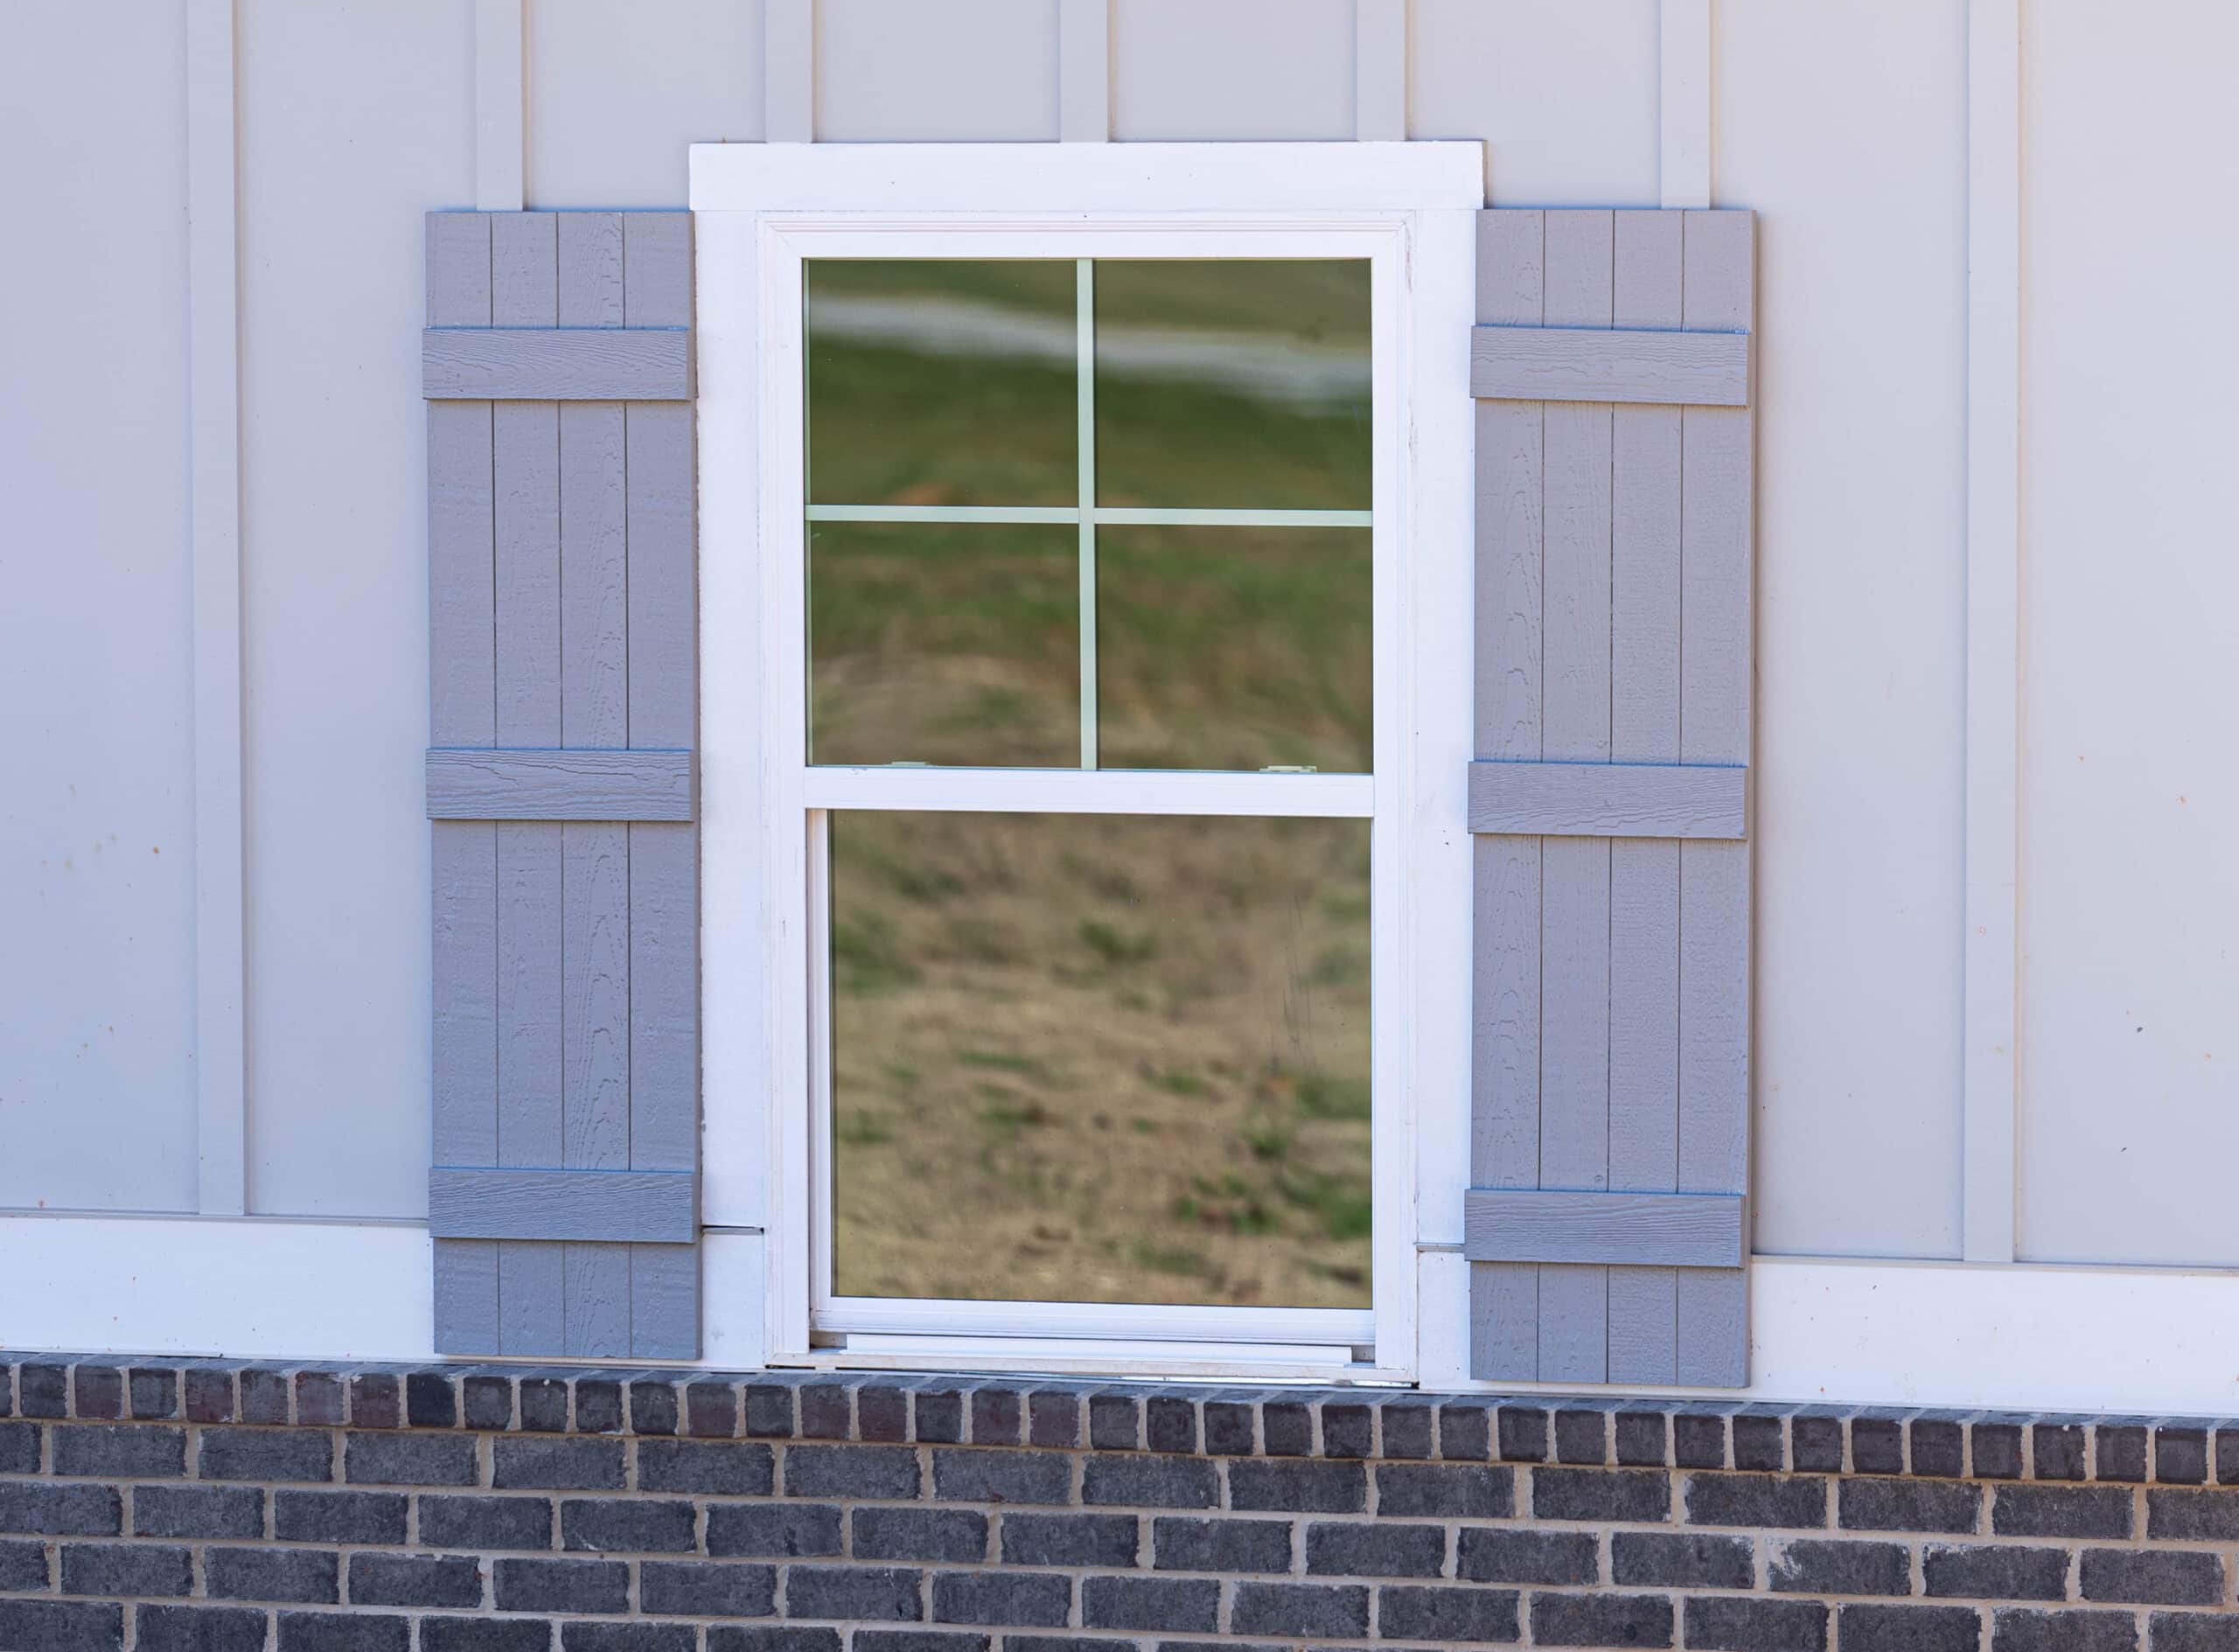 Do Windows and Shutters Add Value to a Home?